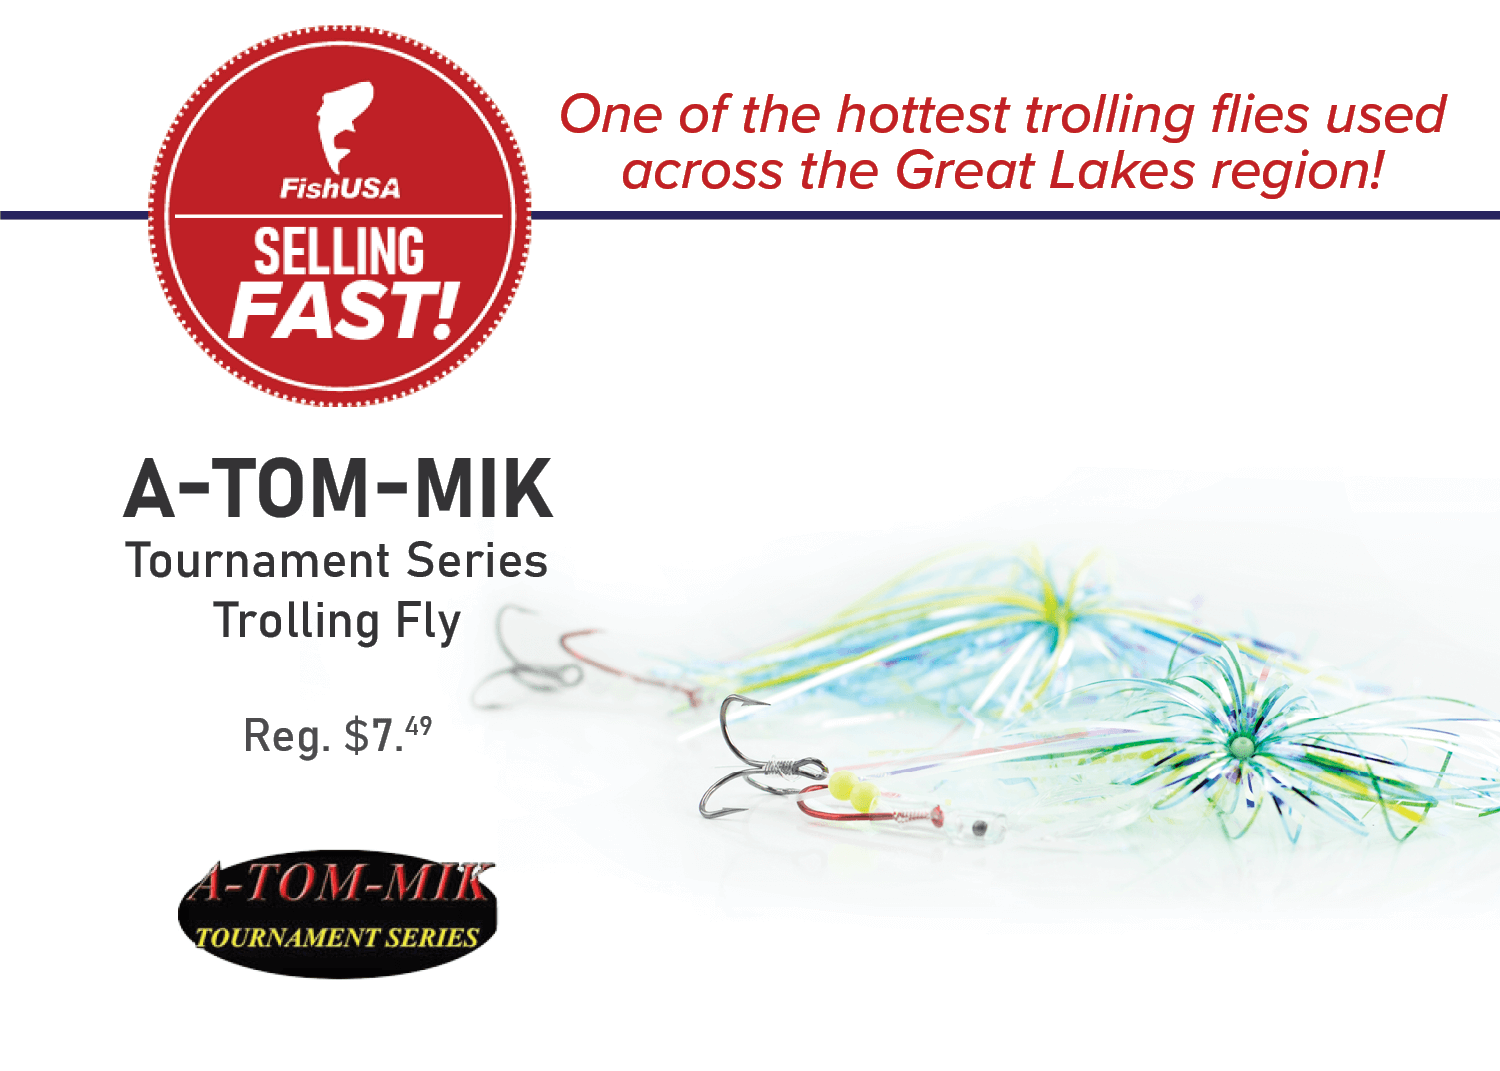 A-TOM-MIK Tournament Series Trolling Fly